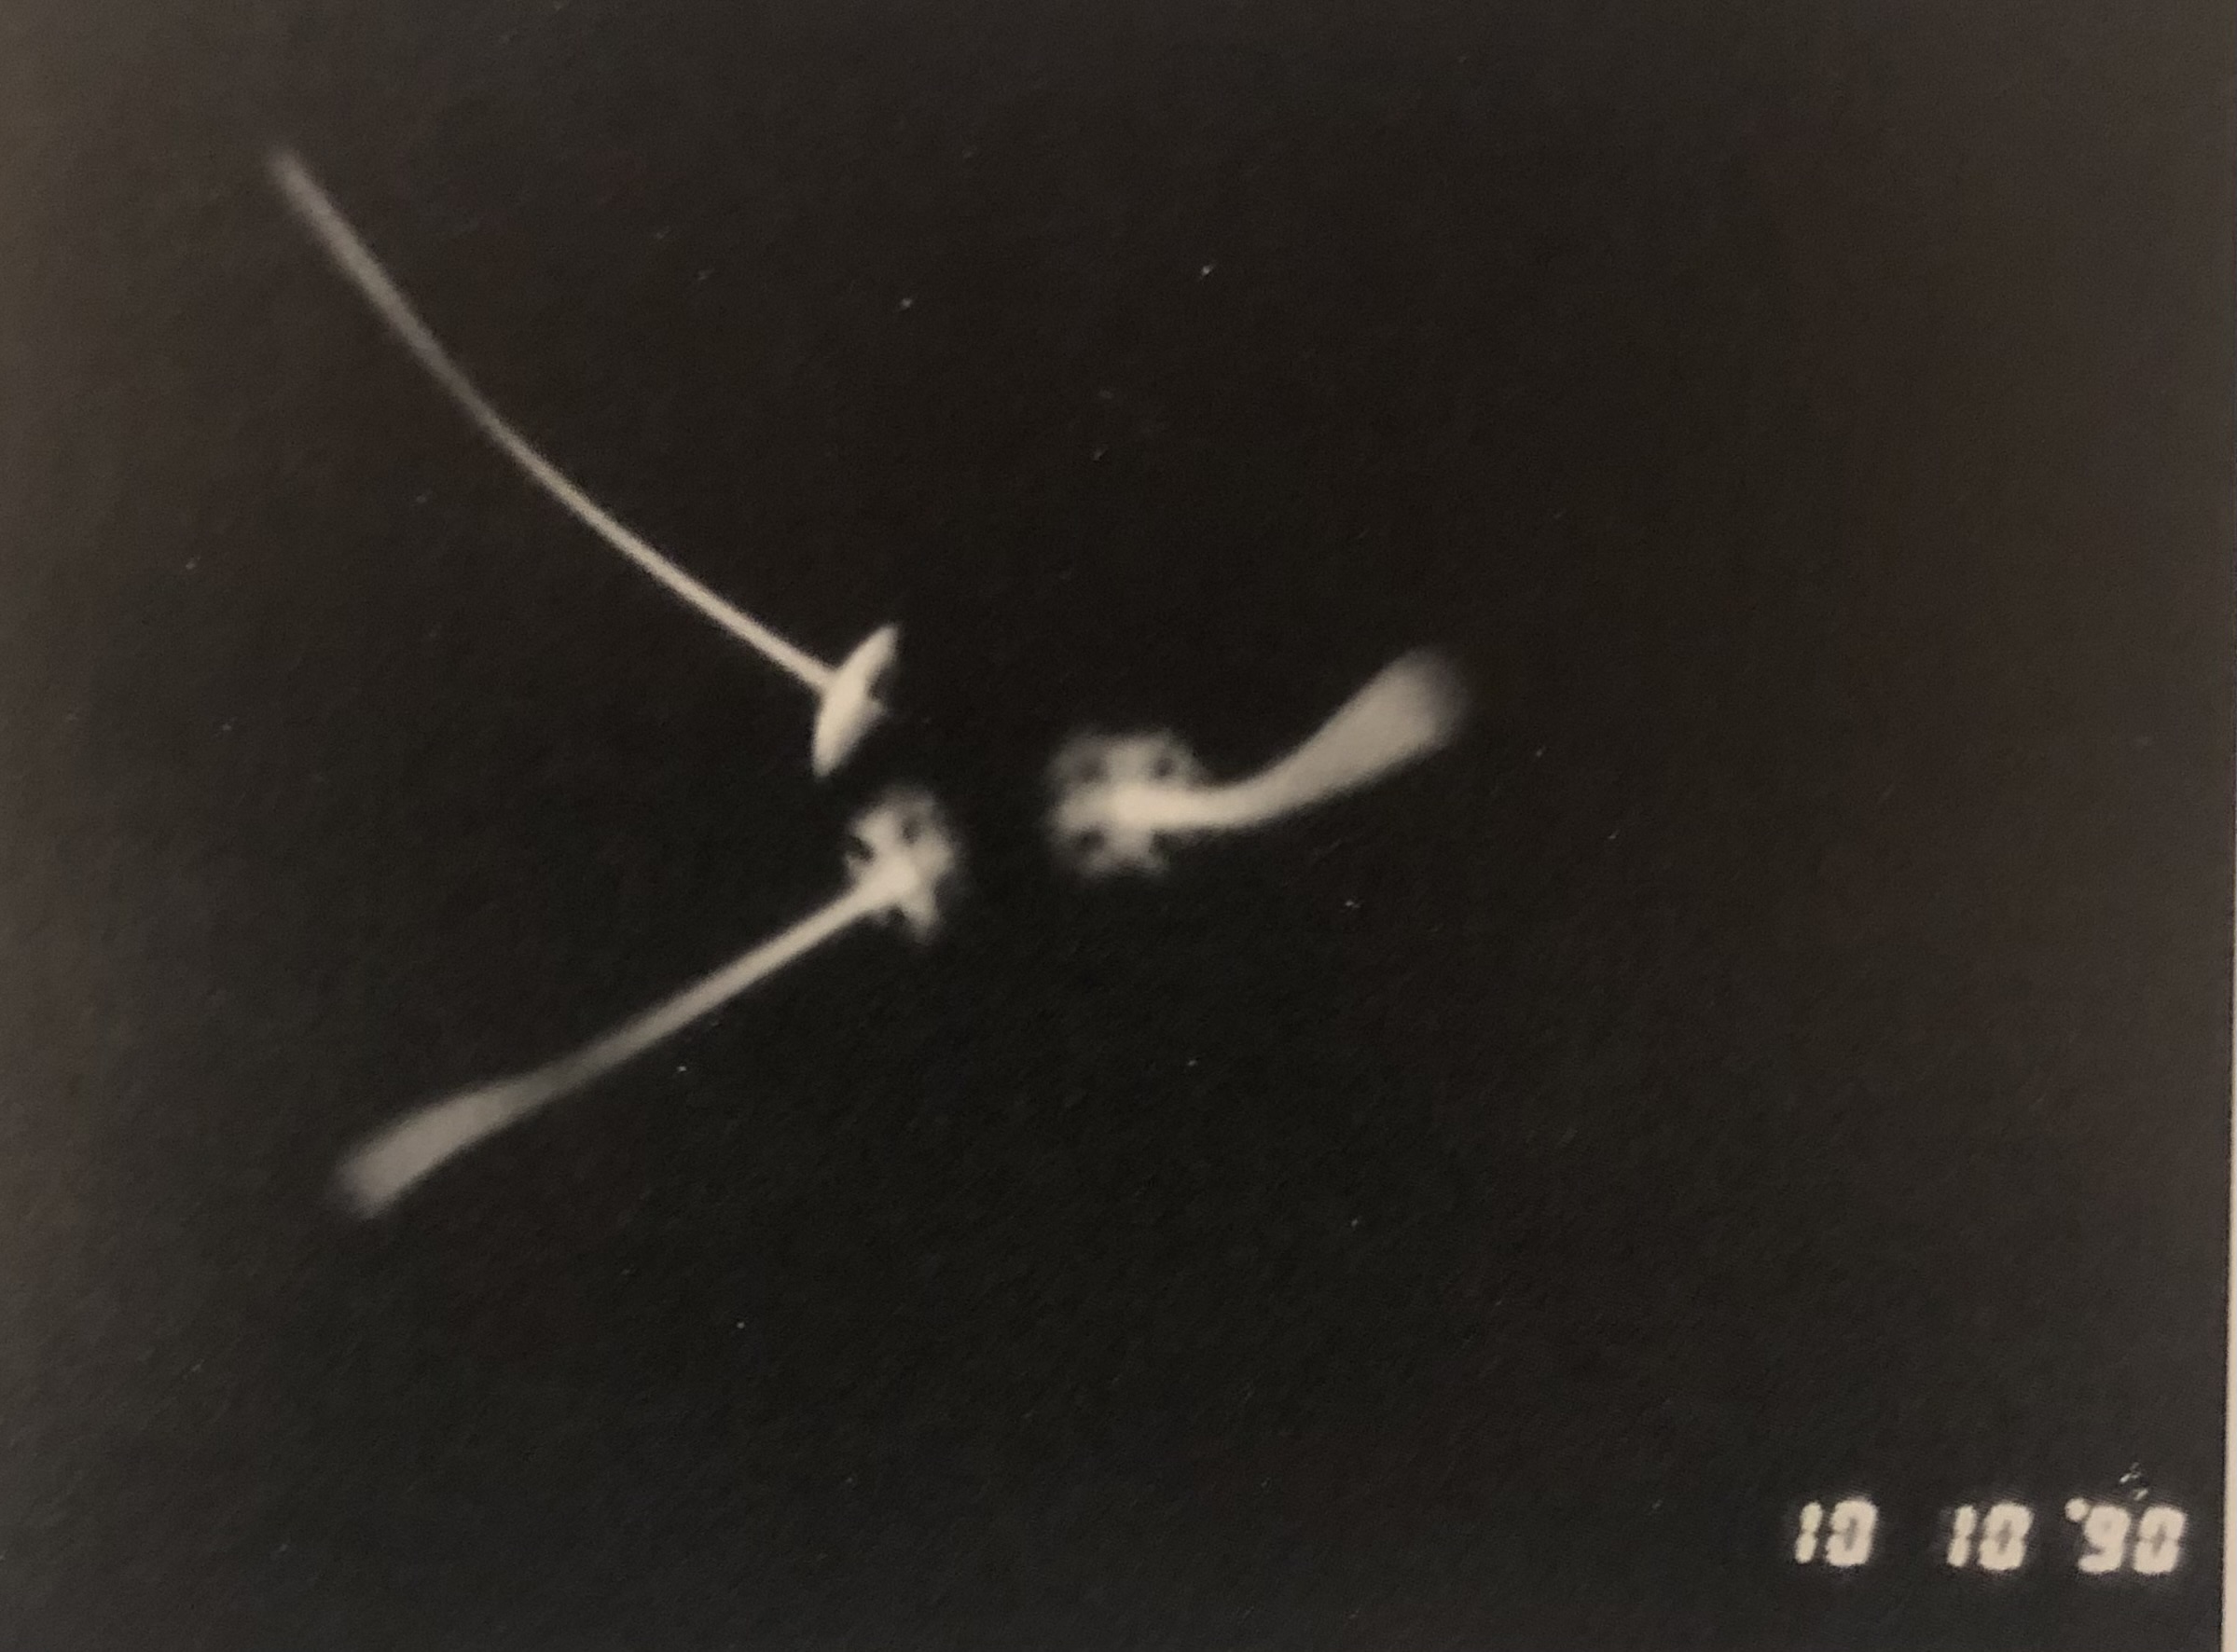 A black and white photograph of what appear to be 3 falling tiny flower and stem shaped objects. The flower ends of the objects are all facing each other with the blurry stems spreading out behind them in a triangular formation. In digital font it says 10.10.90 in the corner.